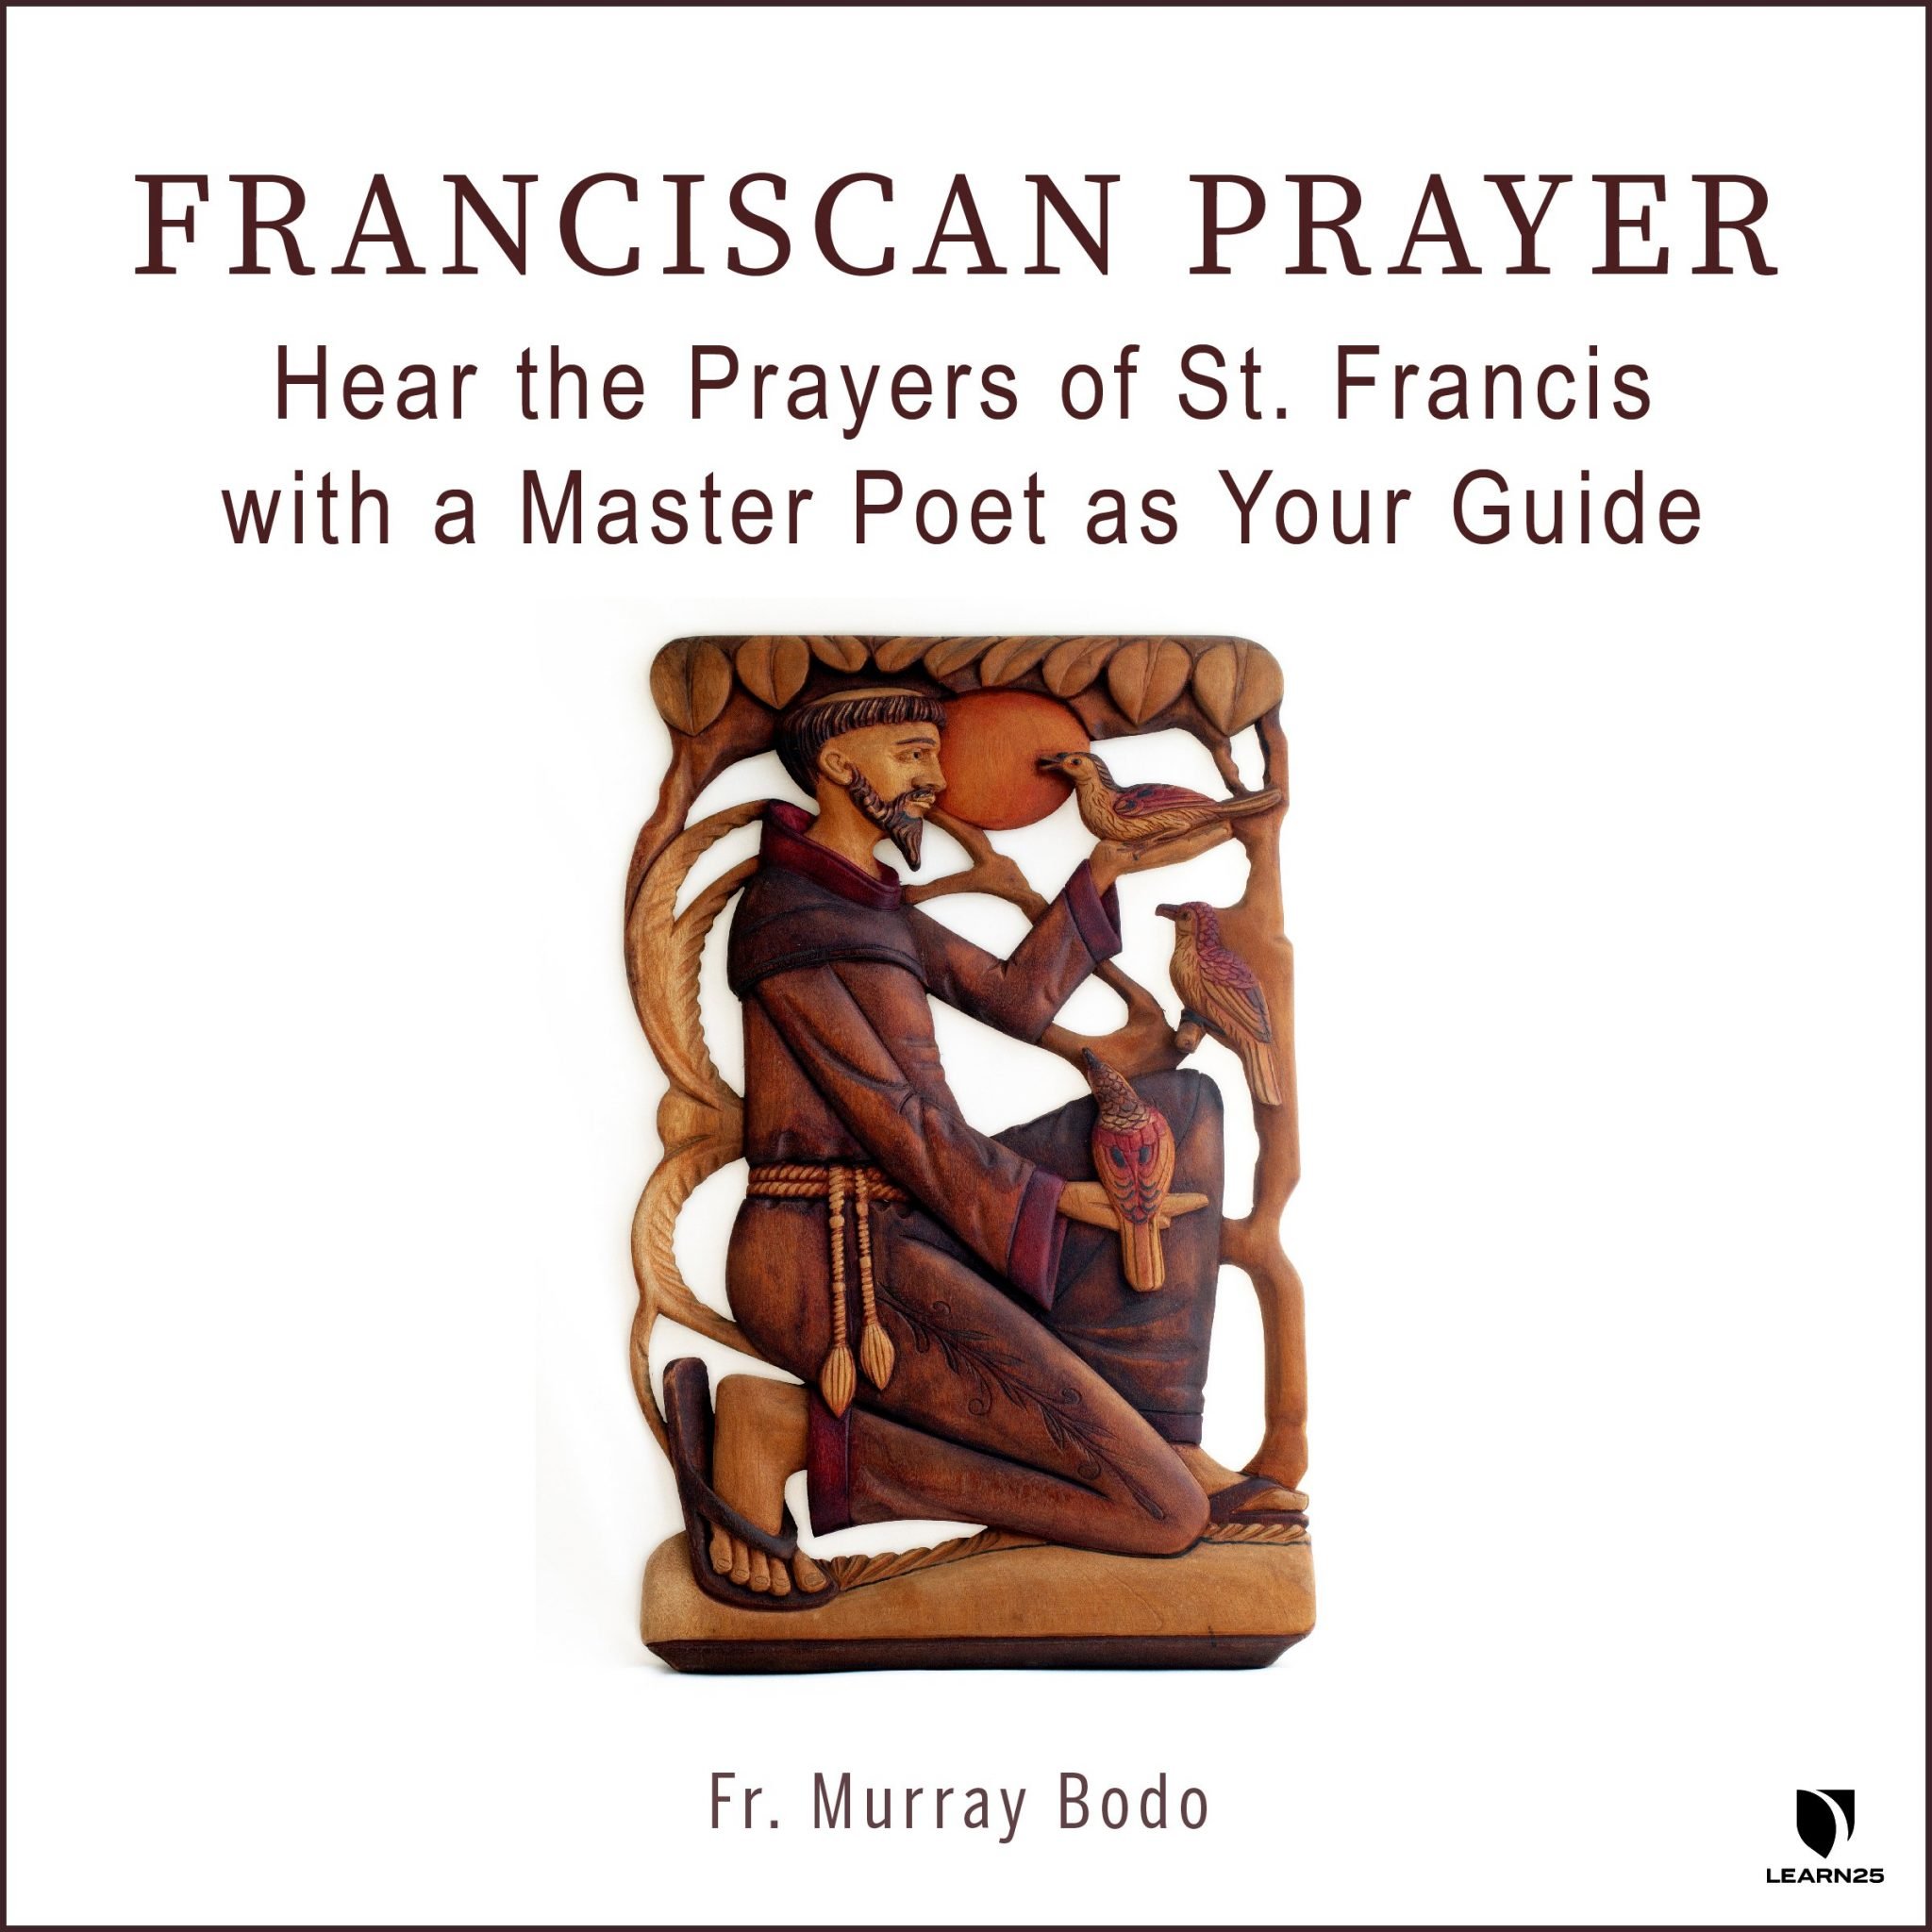 Franciscan Prayer Hear the Prayers of St. Francis with a Master Poet